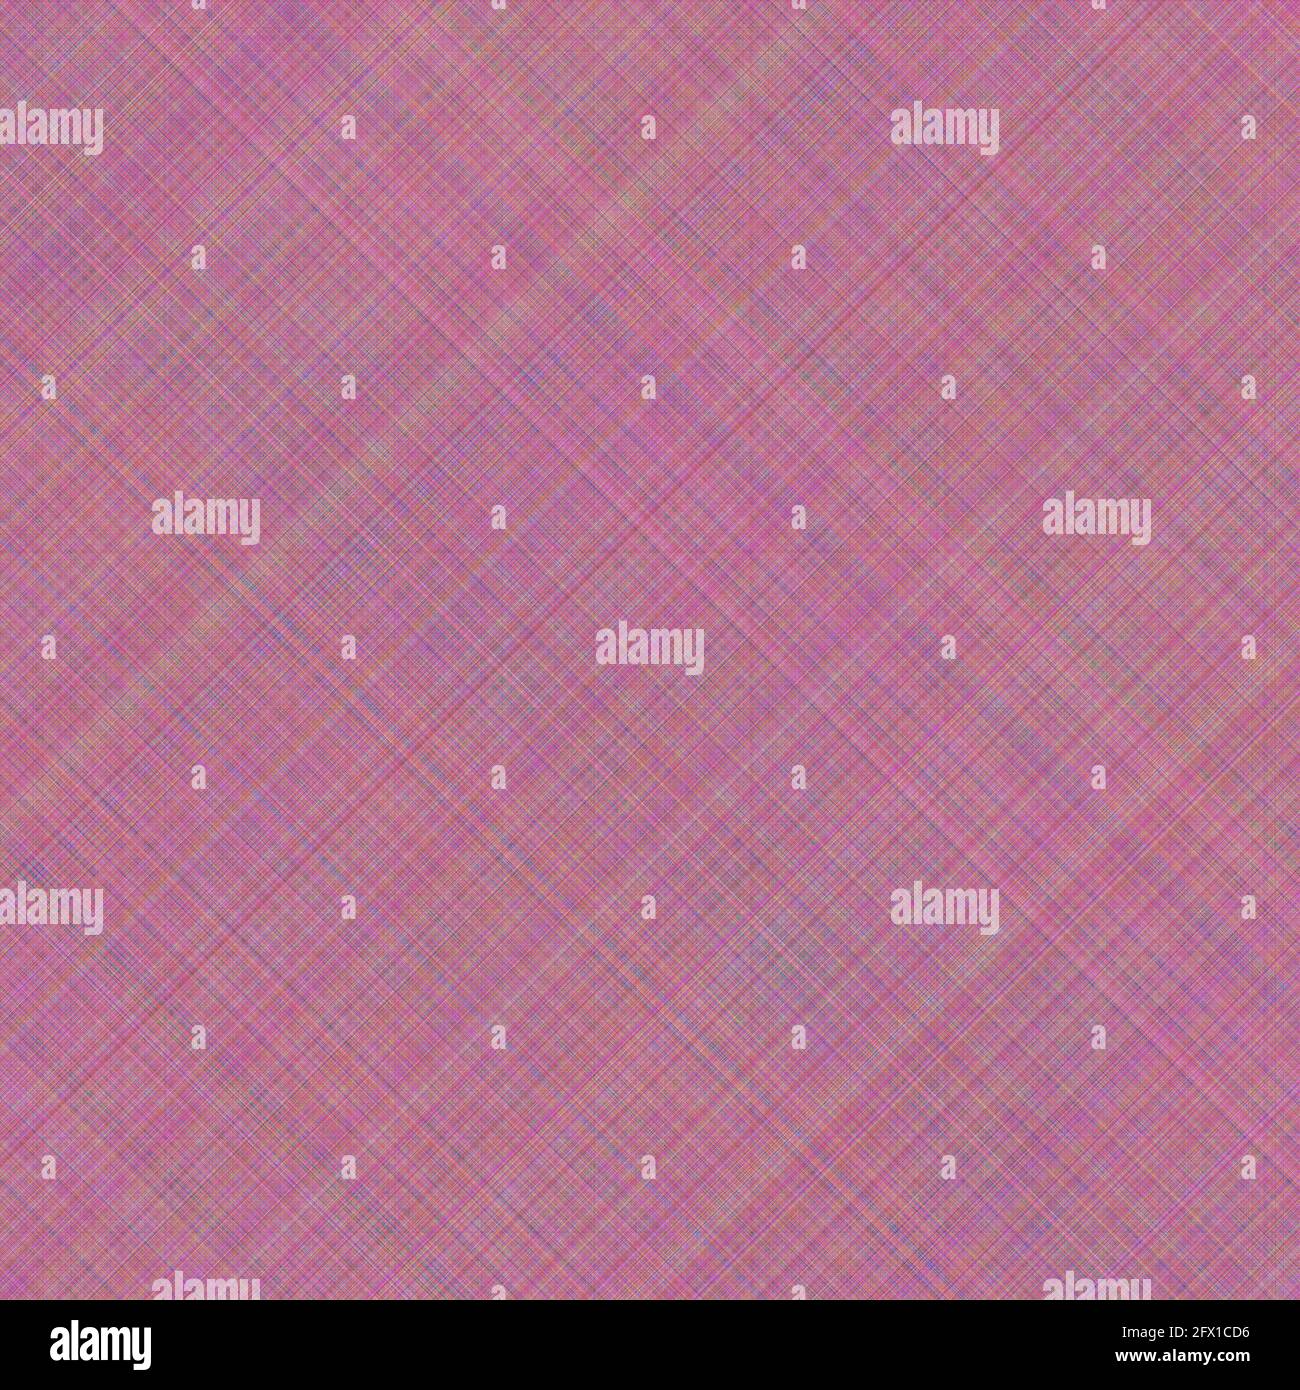 Digital abstract multicolor pattern with thin diagonal orthogonal lines mainly in magenta hues as a modern texture Stock Photo